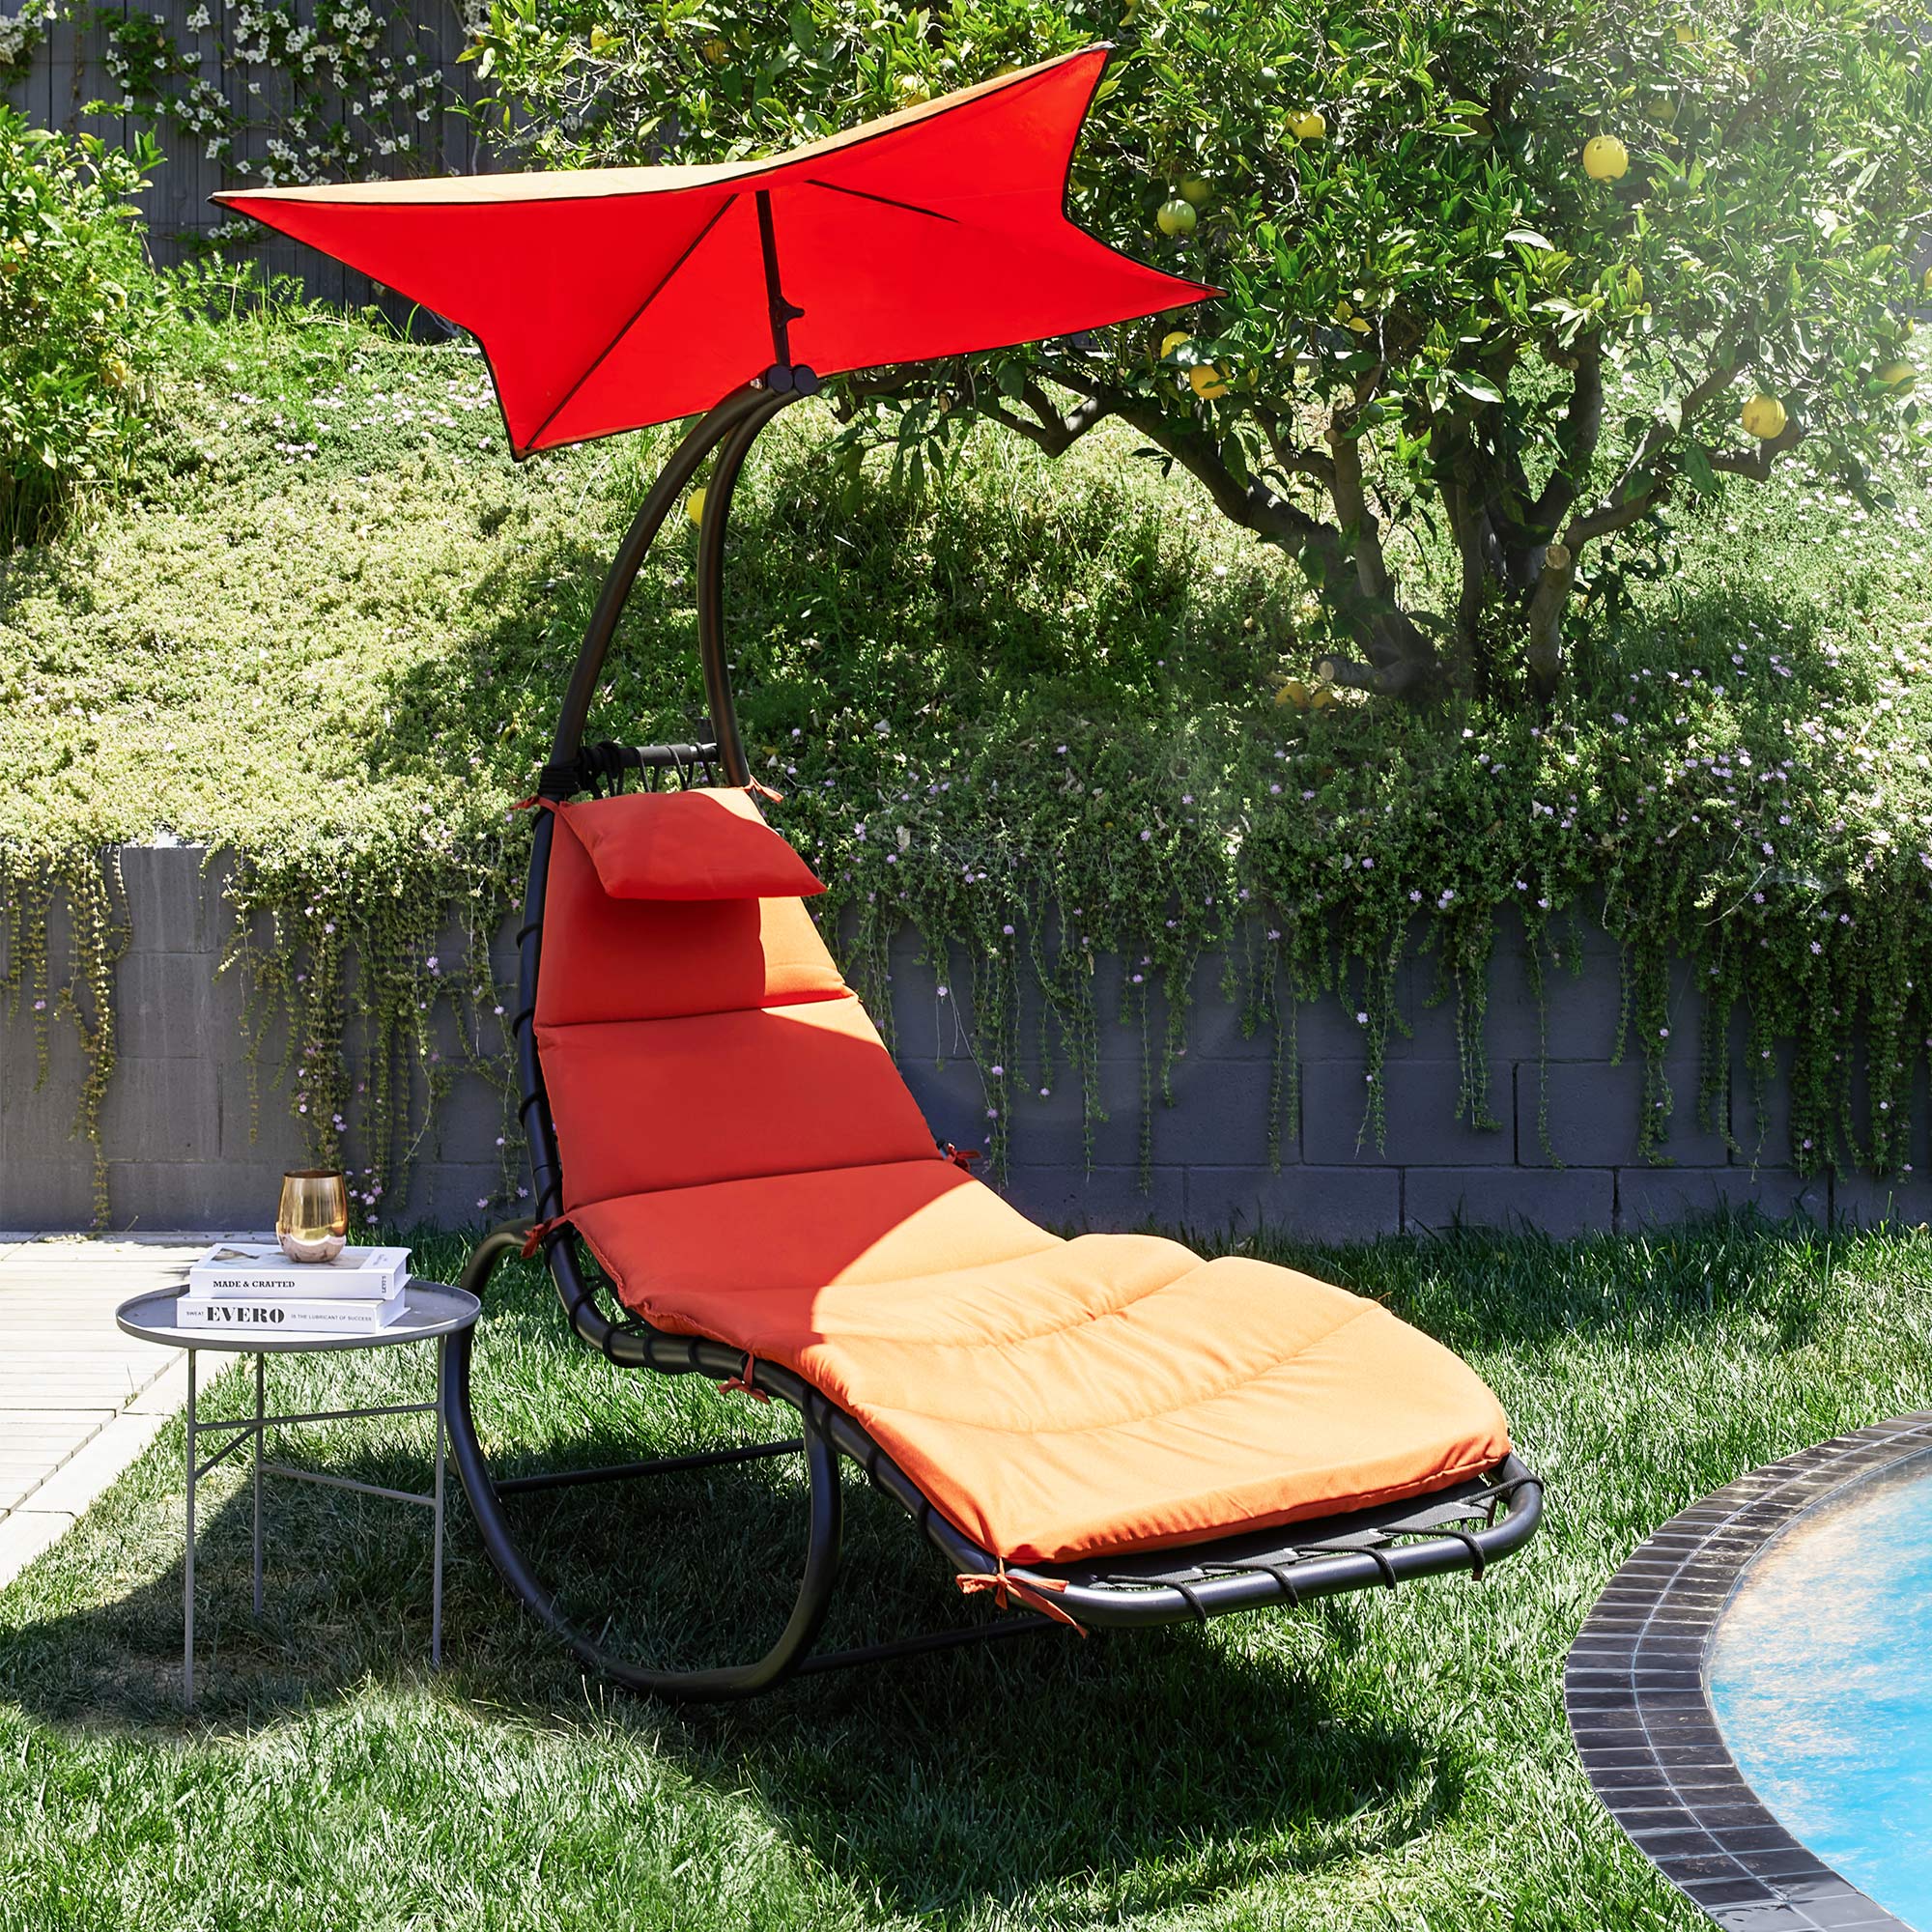 BELLEZE Outdoor Hanging Chaise Lounge Chair Swing Curved Cushion Seat Hammock With Canopy Sun Shade, Orange - image 1 of 4